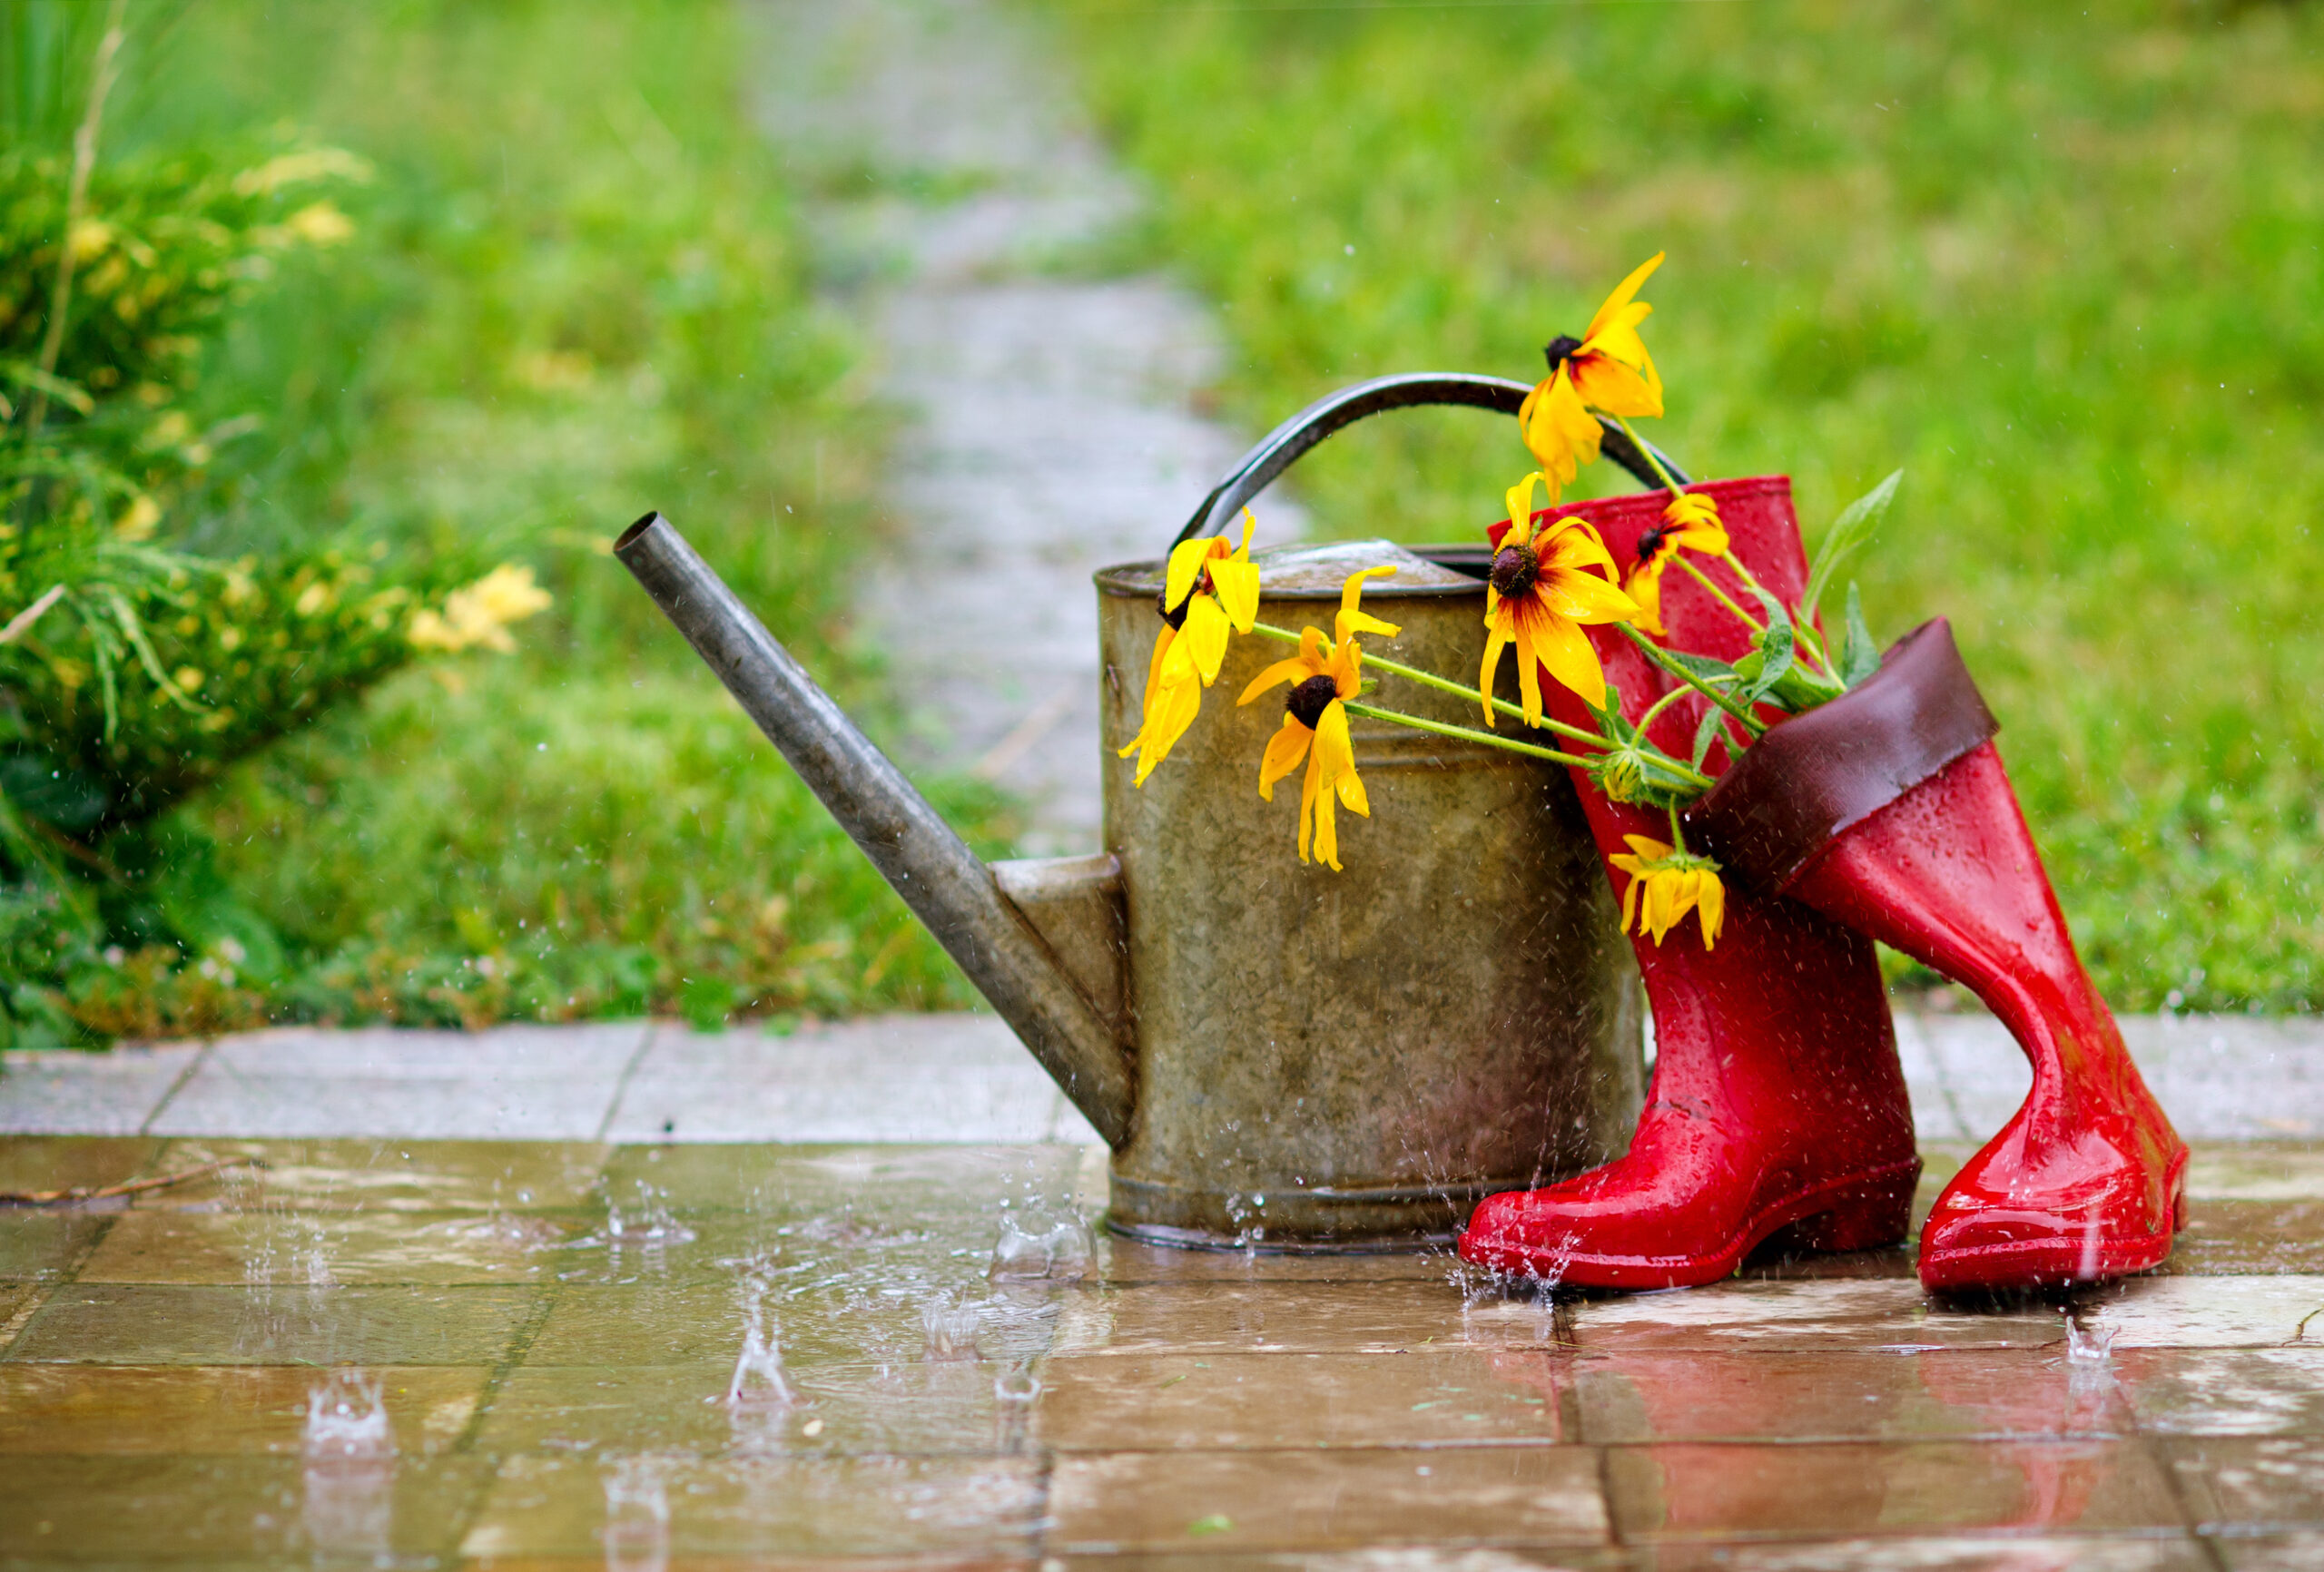 How to Care for Your Plants in Too Much Rain